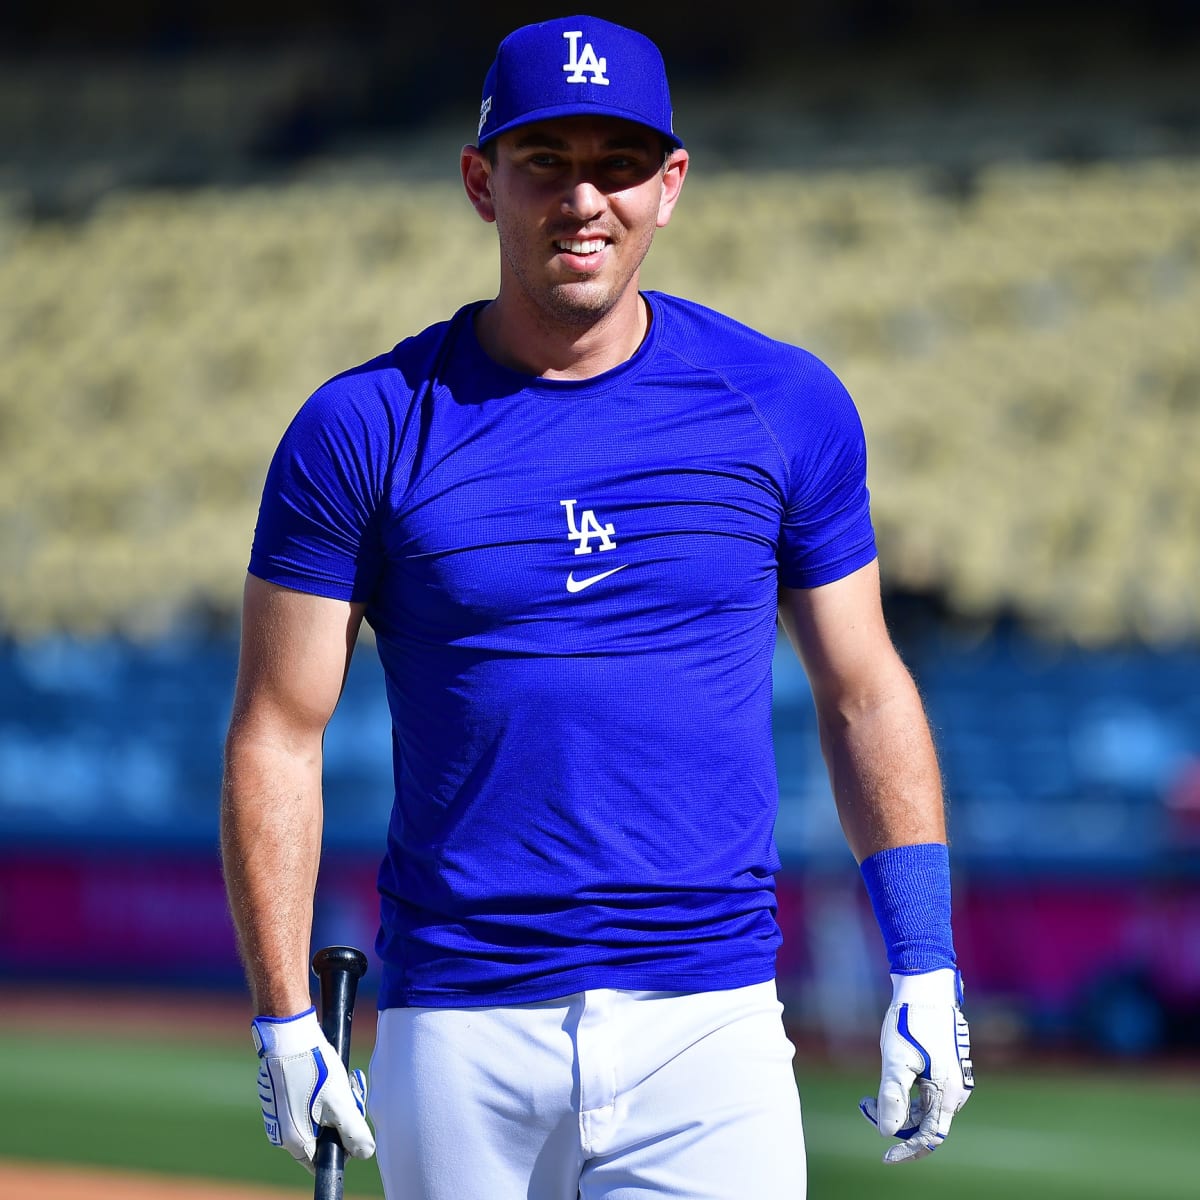 Dodgers News: Austin Barnes Left as Only Catcher for Team Mexico